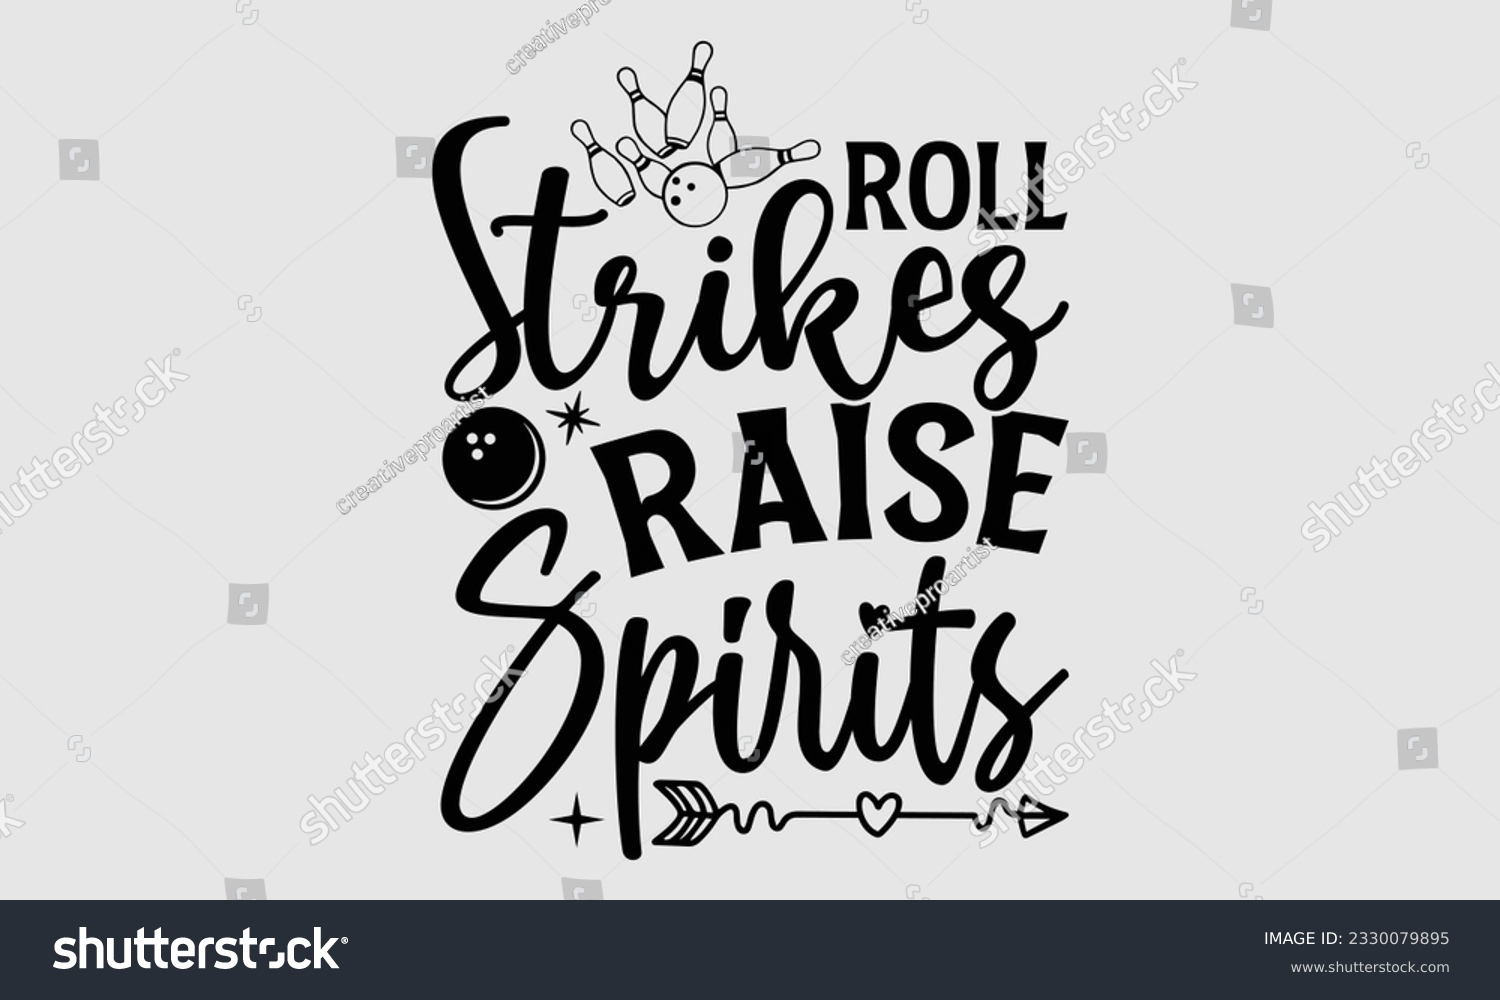 SVG of Roll Strikes Raise Spirits- Bowling t-shirt design, Handmade calligraphy vector Illustration for prints on SVG and bags, posters, greeting card template EPS svg